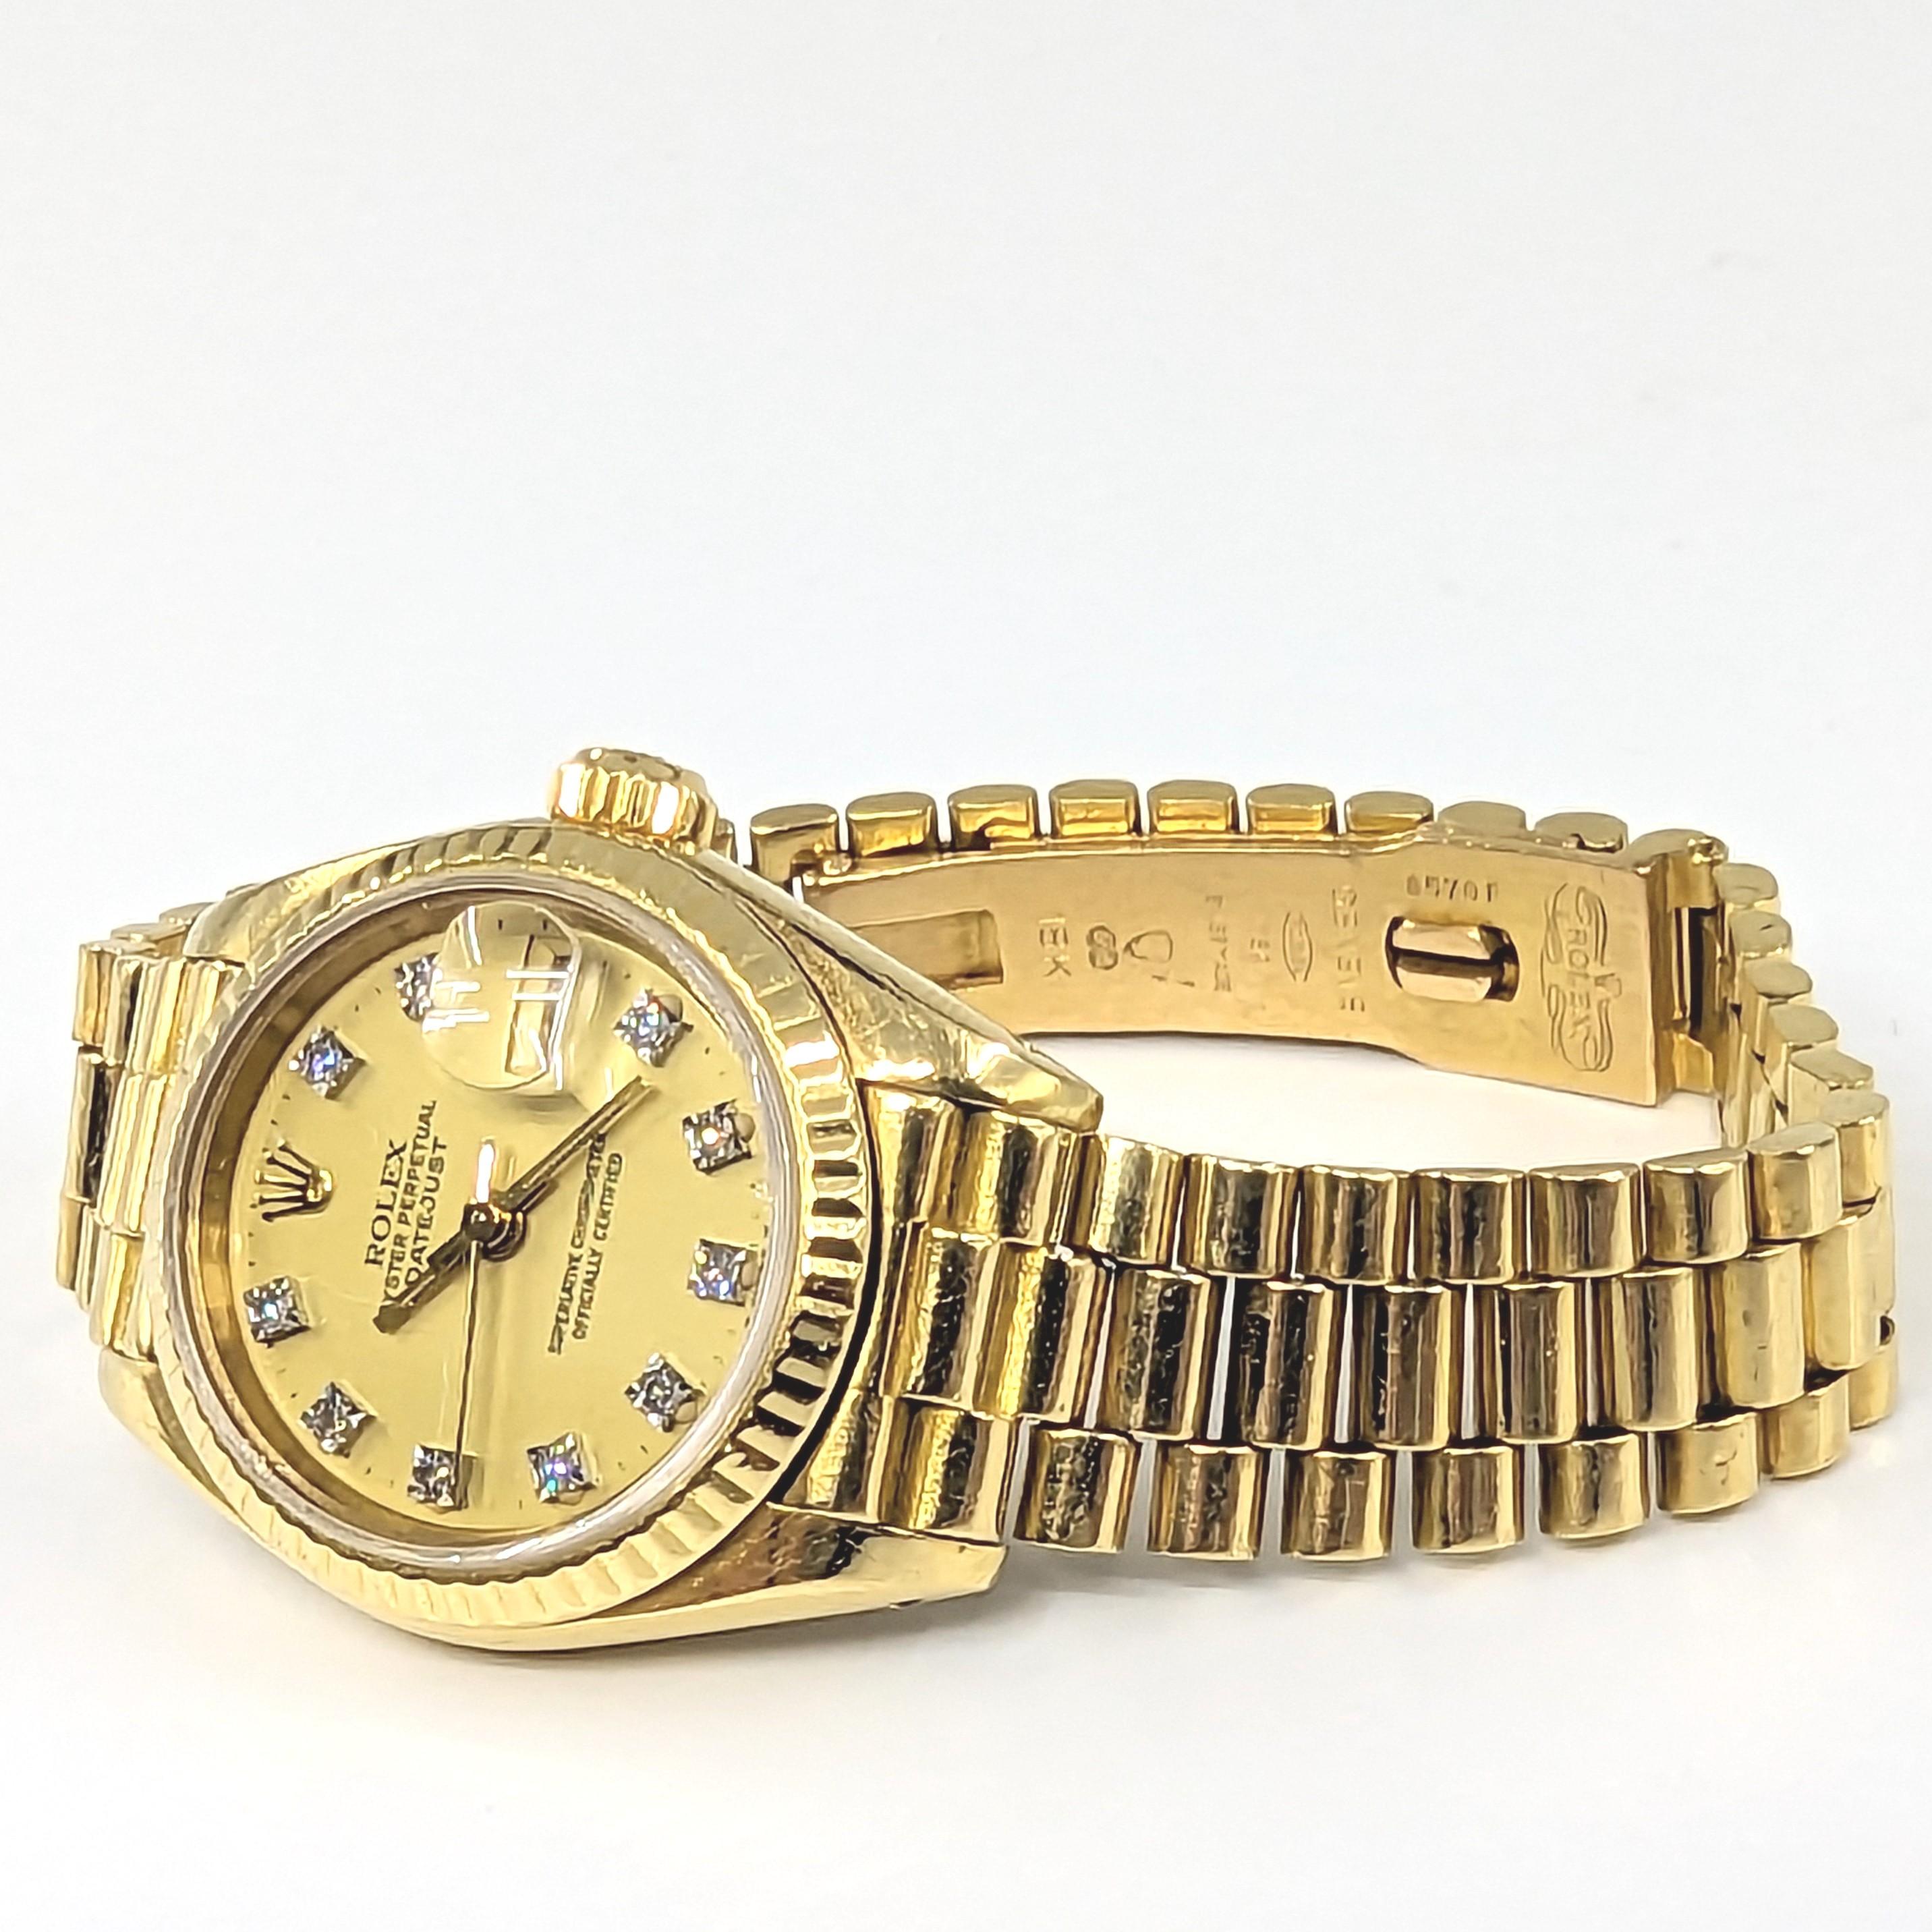 Ladies Rolex 18k Presidential Bracelet Watch Solid Gold Diamond Dial ref 69178 In Good Condition For Sale In Richmond, CA